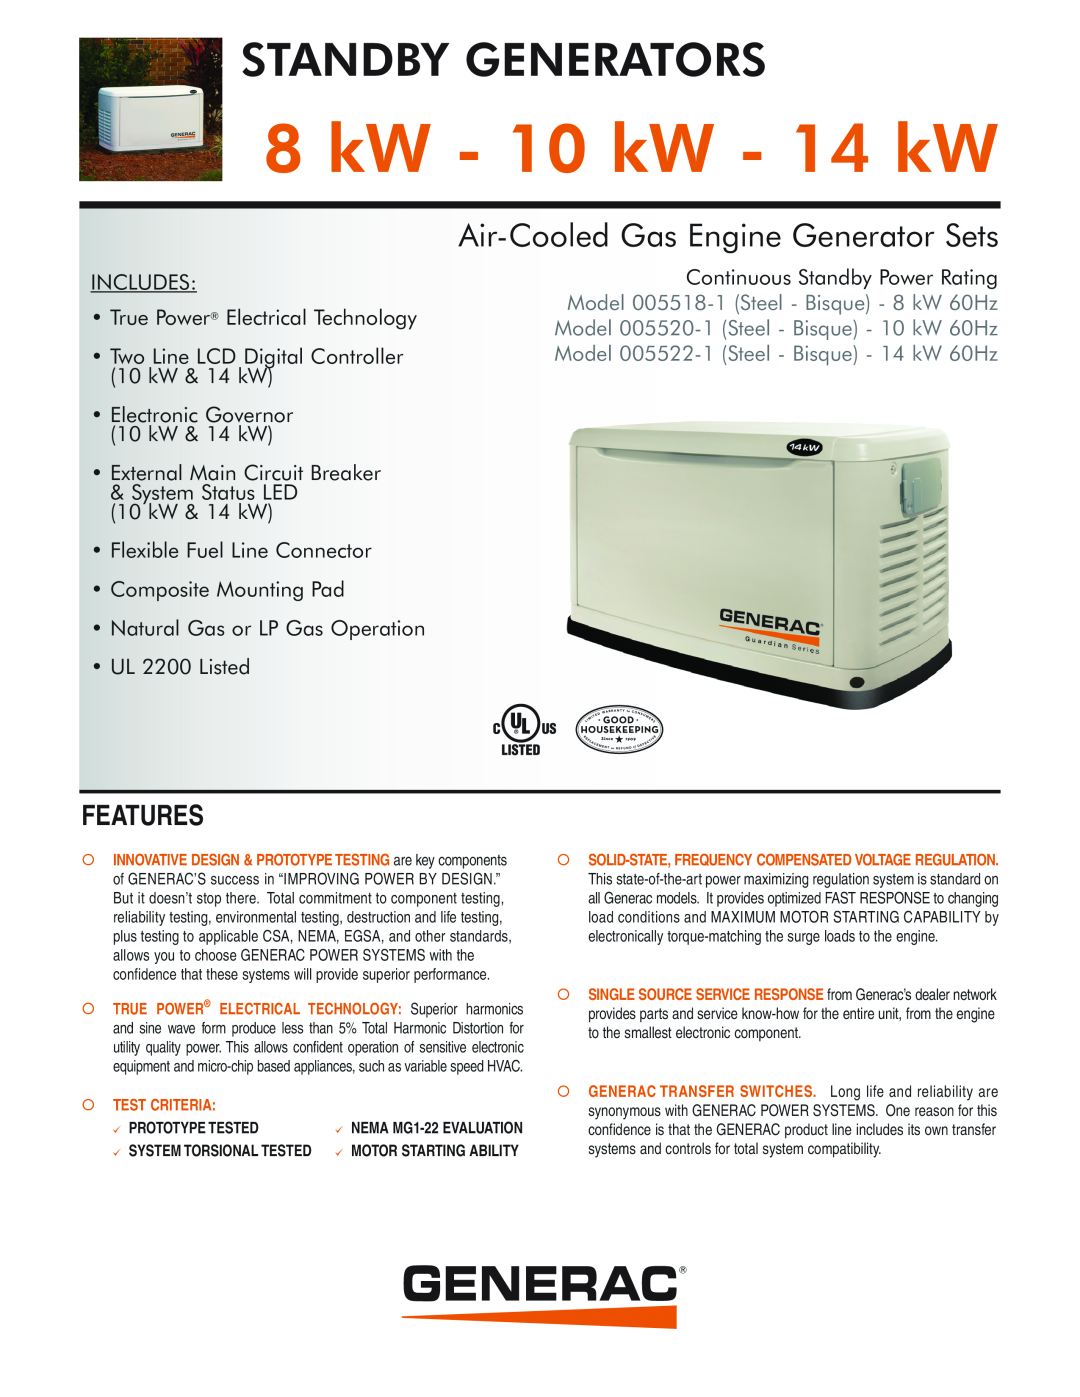 Generac 005522-1, 005520-1 manual Features, kW - 10 kW - 14 kW, Standby Generators, Air-CooledGas Engine Generator Sets 